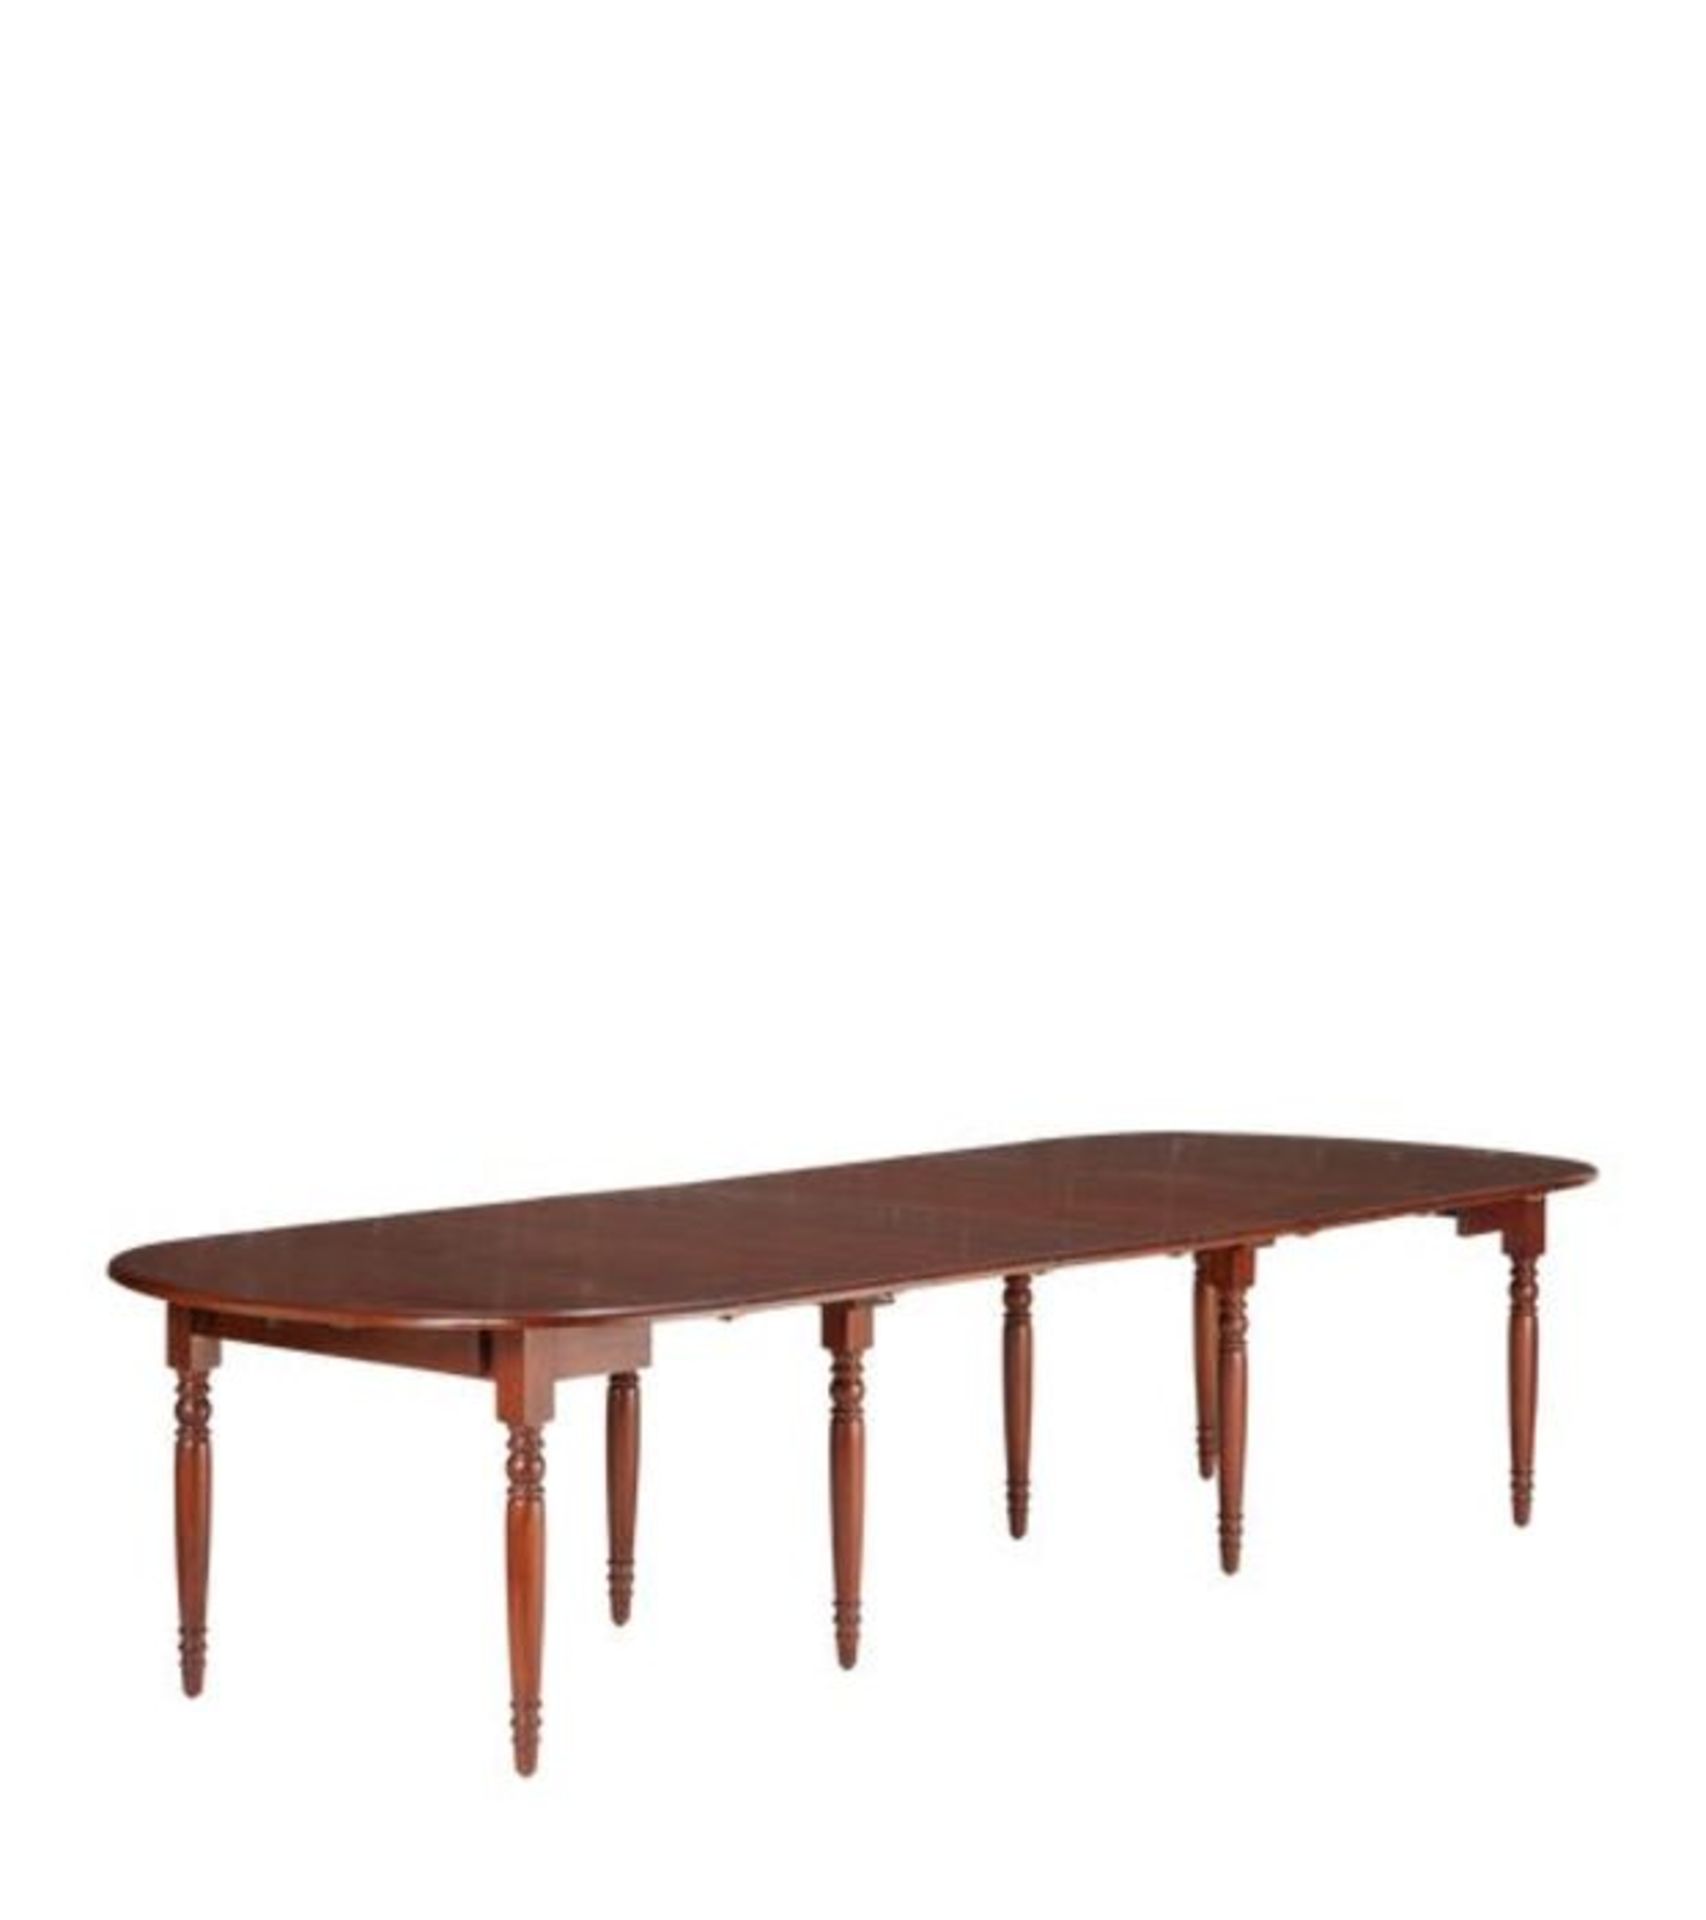 Oka Petworth Dining Table French Walnut Extending Seats 12 RRP 2950.00 - Image 5 of 8